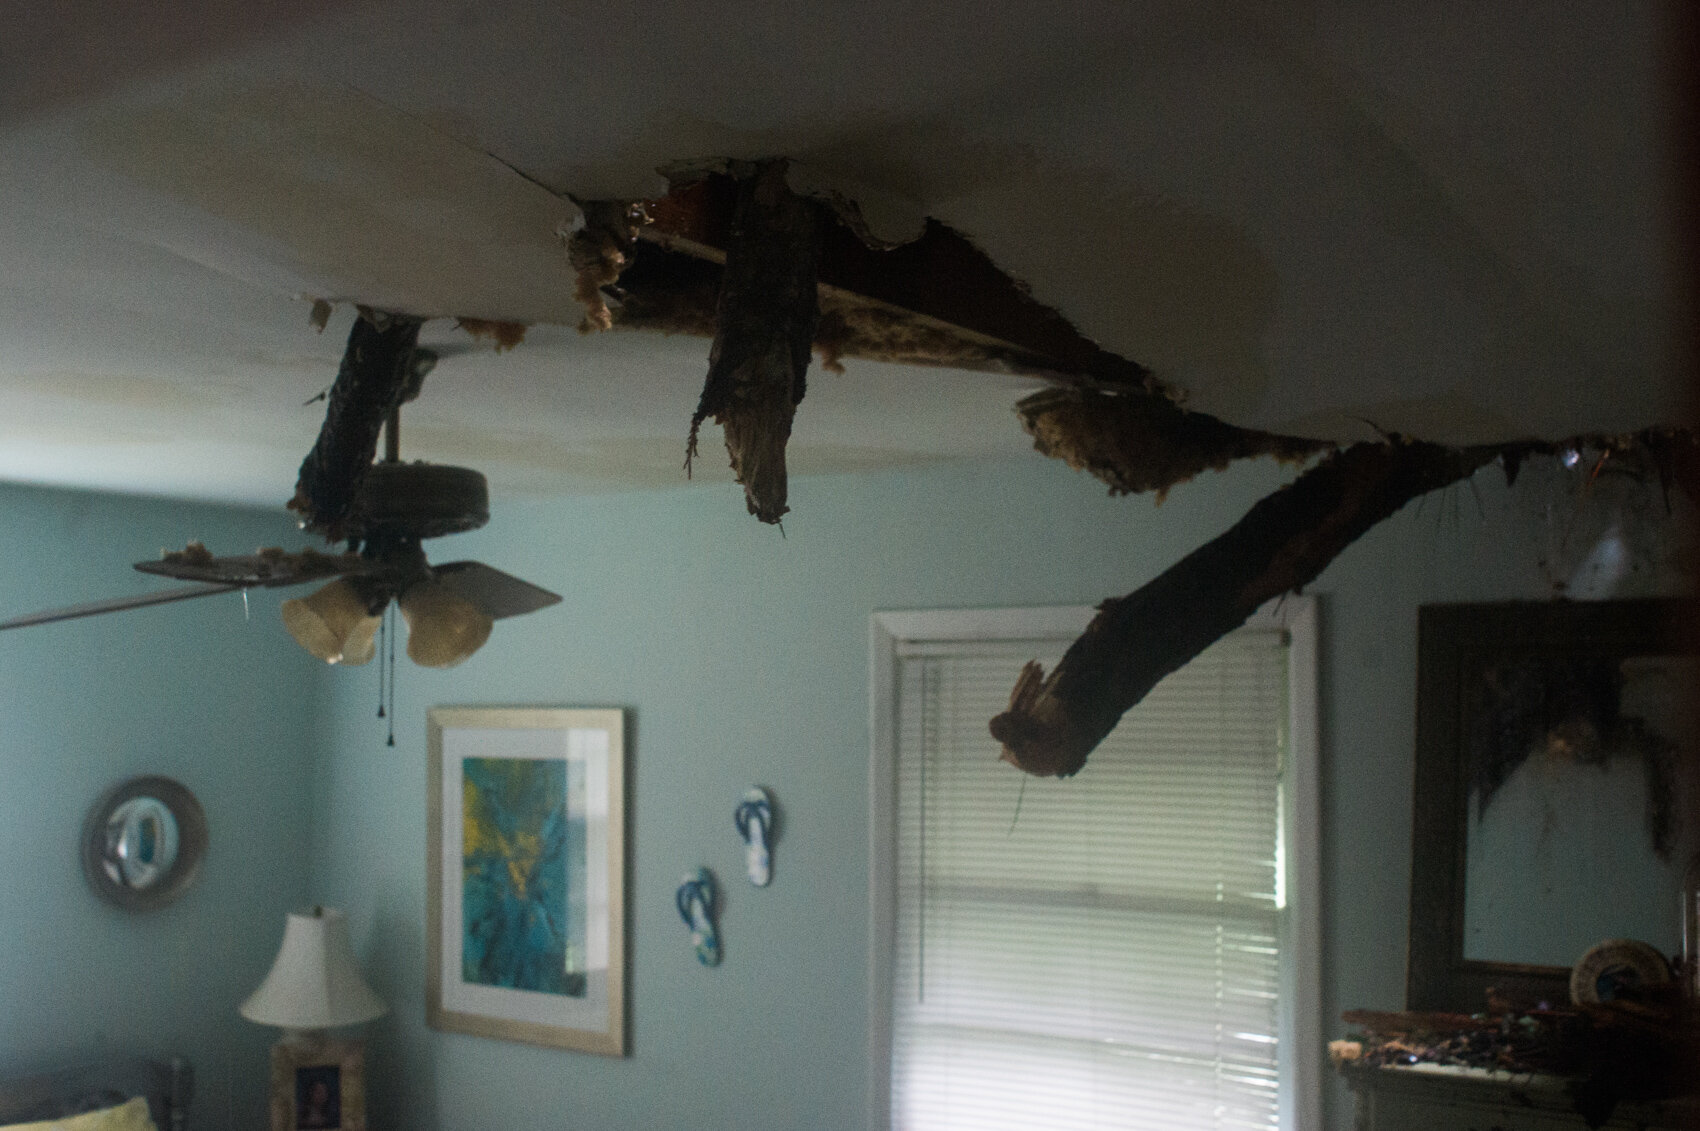  A fallen tree caused extensive water damage inside a Wilmington home after Hurricane Florence. (Port City Daily photo/Mark Darrough) 